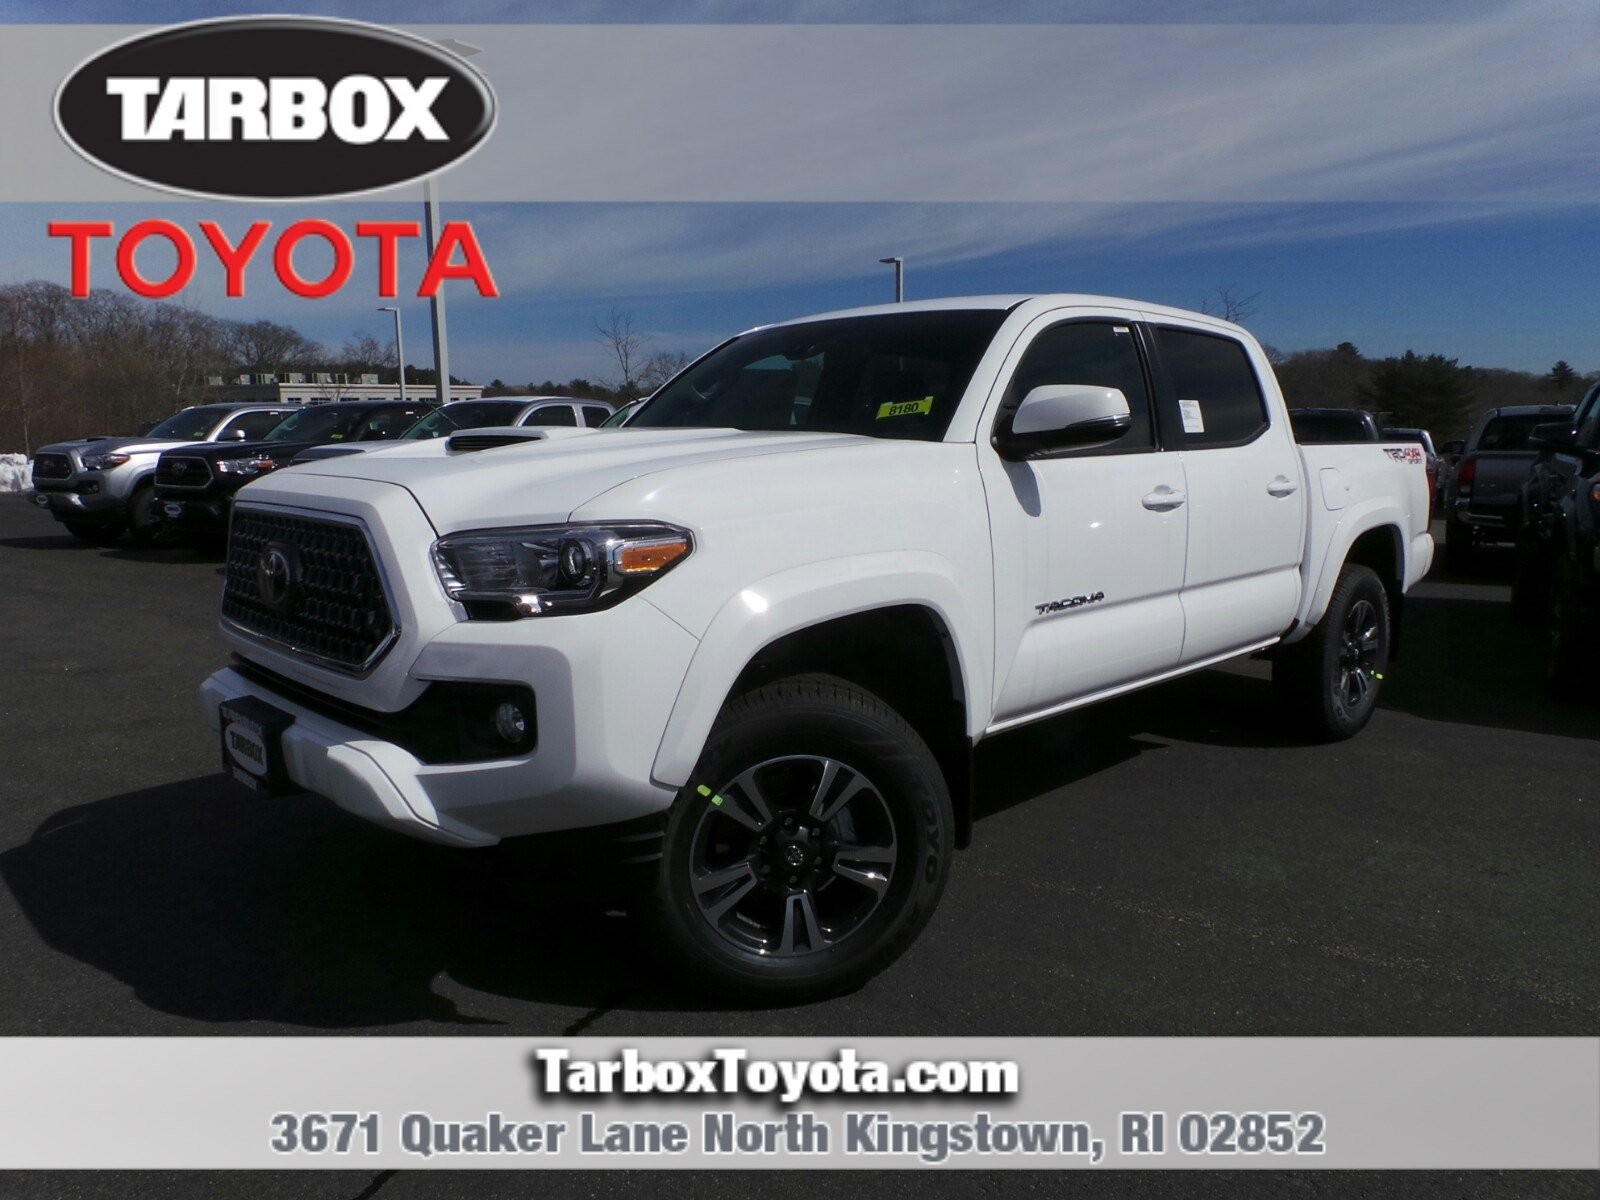 2006 toyota Tacoma Parts Diagram New 2019 toyota Ta A for Sale In north Kingstown Ri Near Warwick L Of 2006 toyota Tacoma Parts Diagram